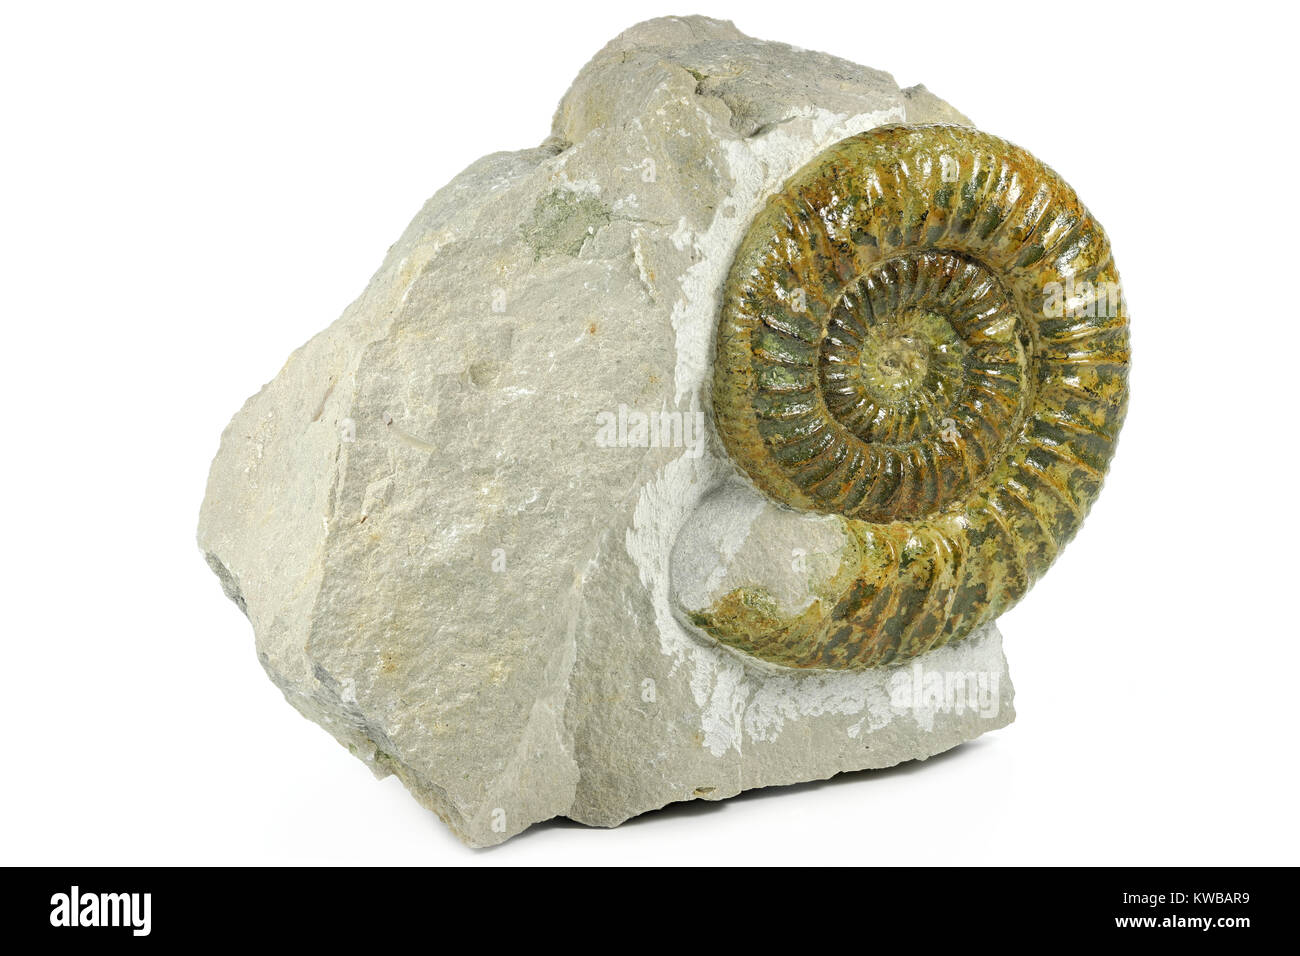 fossil Ataxioceras genuinum ammonite from Upper Palatinate, Germany isolated on white background Stock Photo